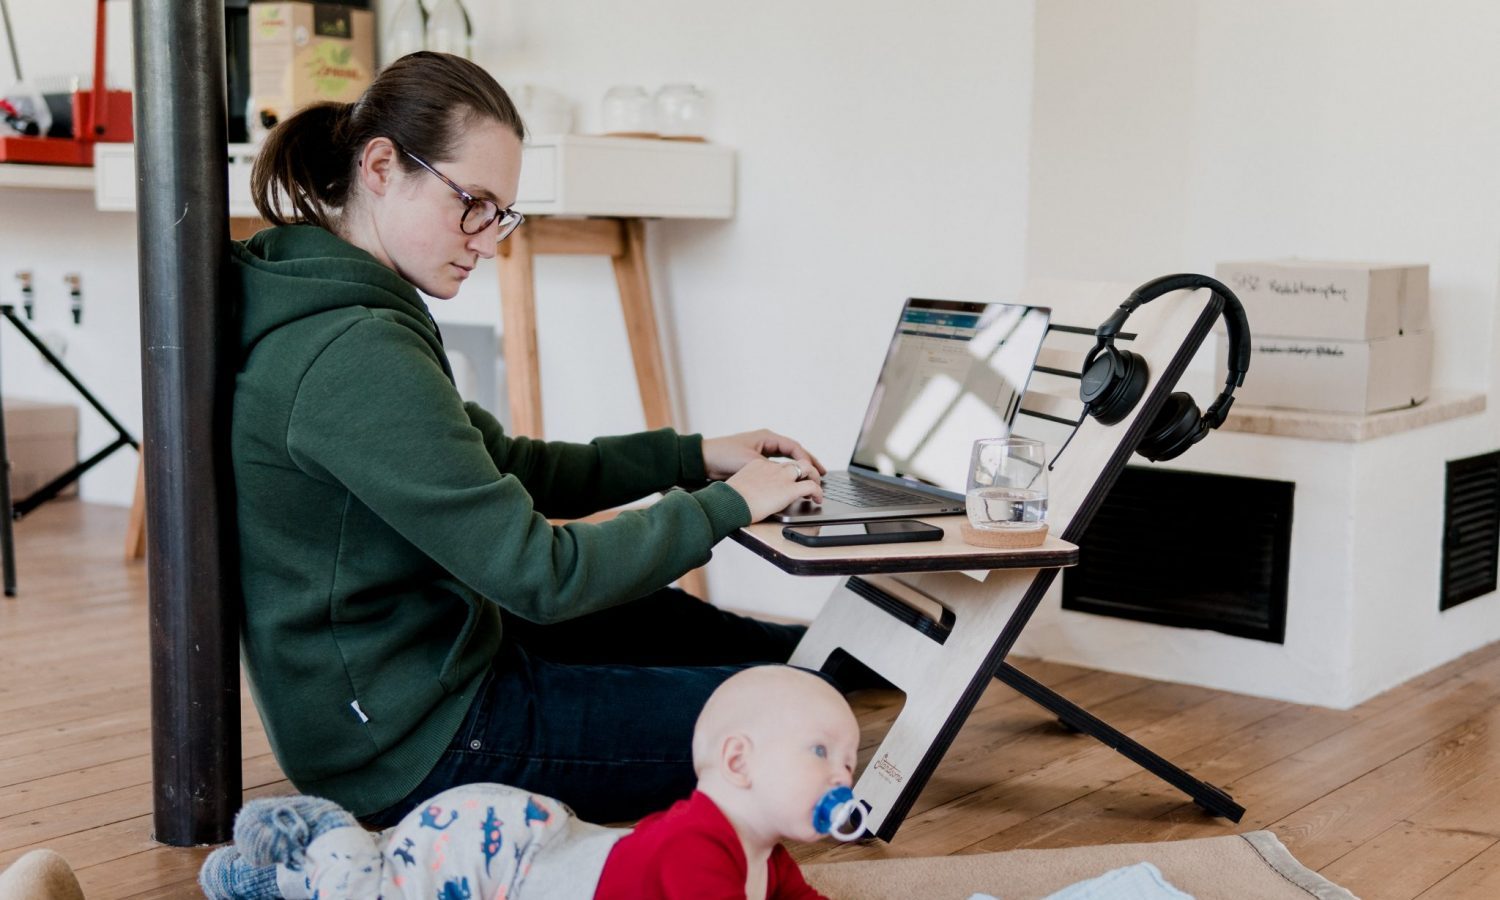 Can You Work From Home Forever? A Lot Of People Want To